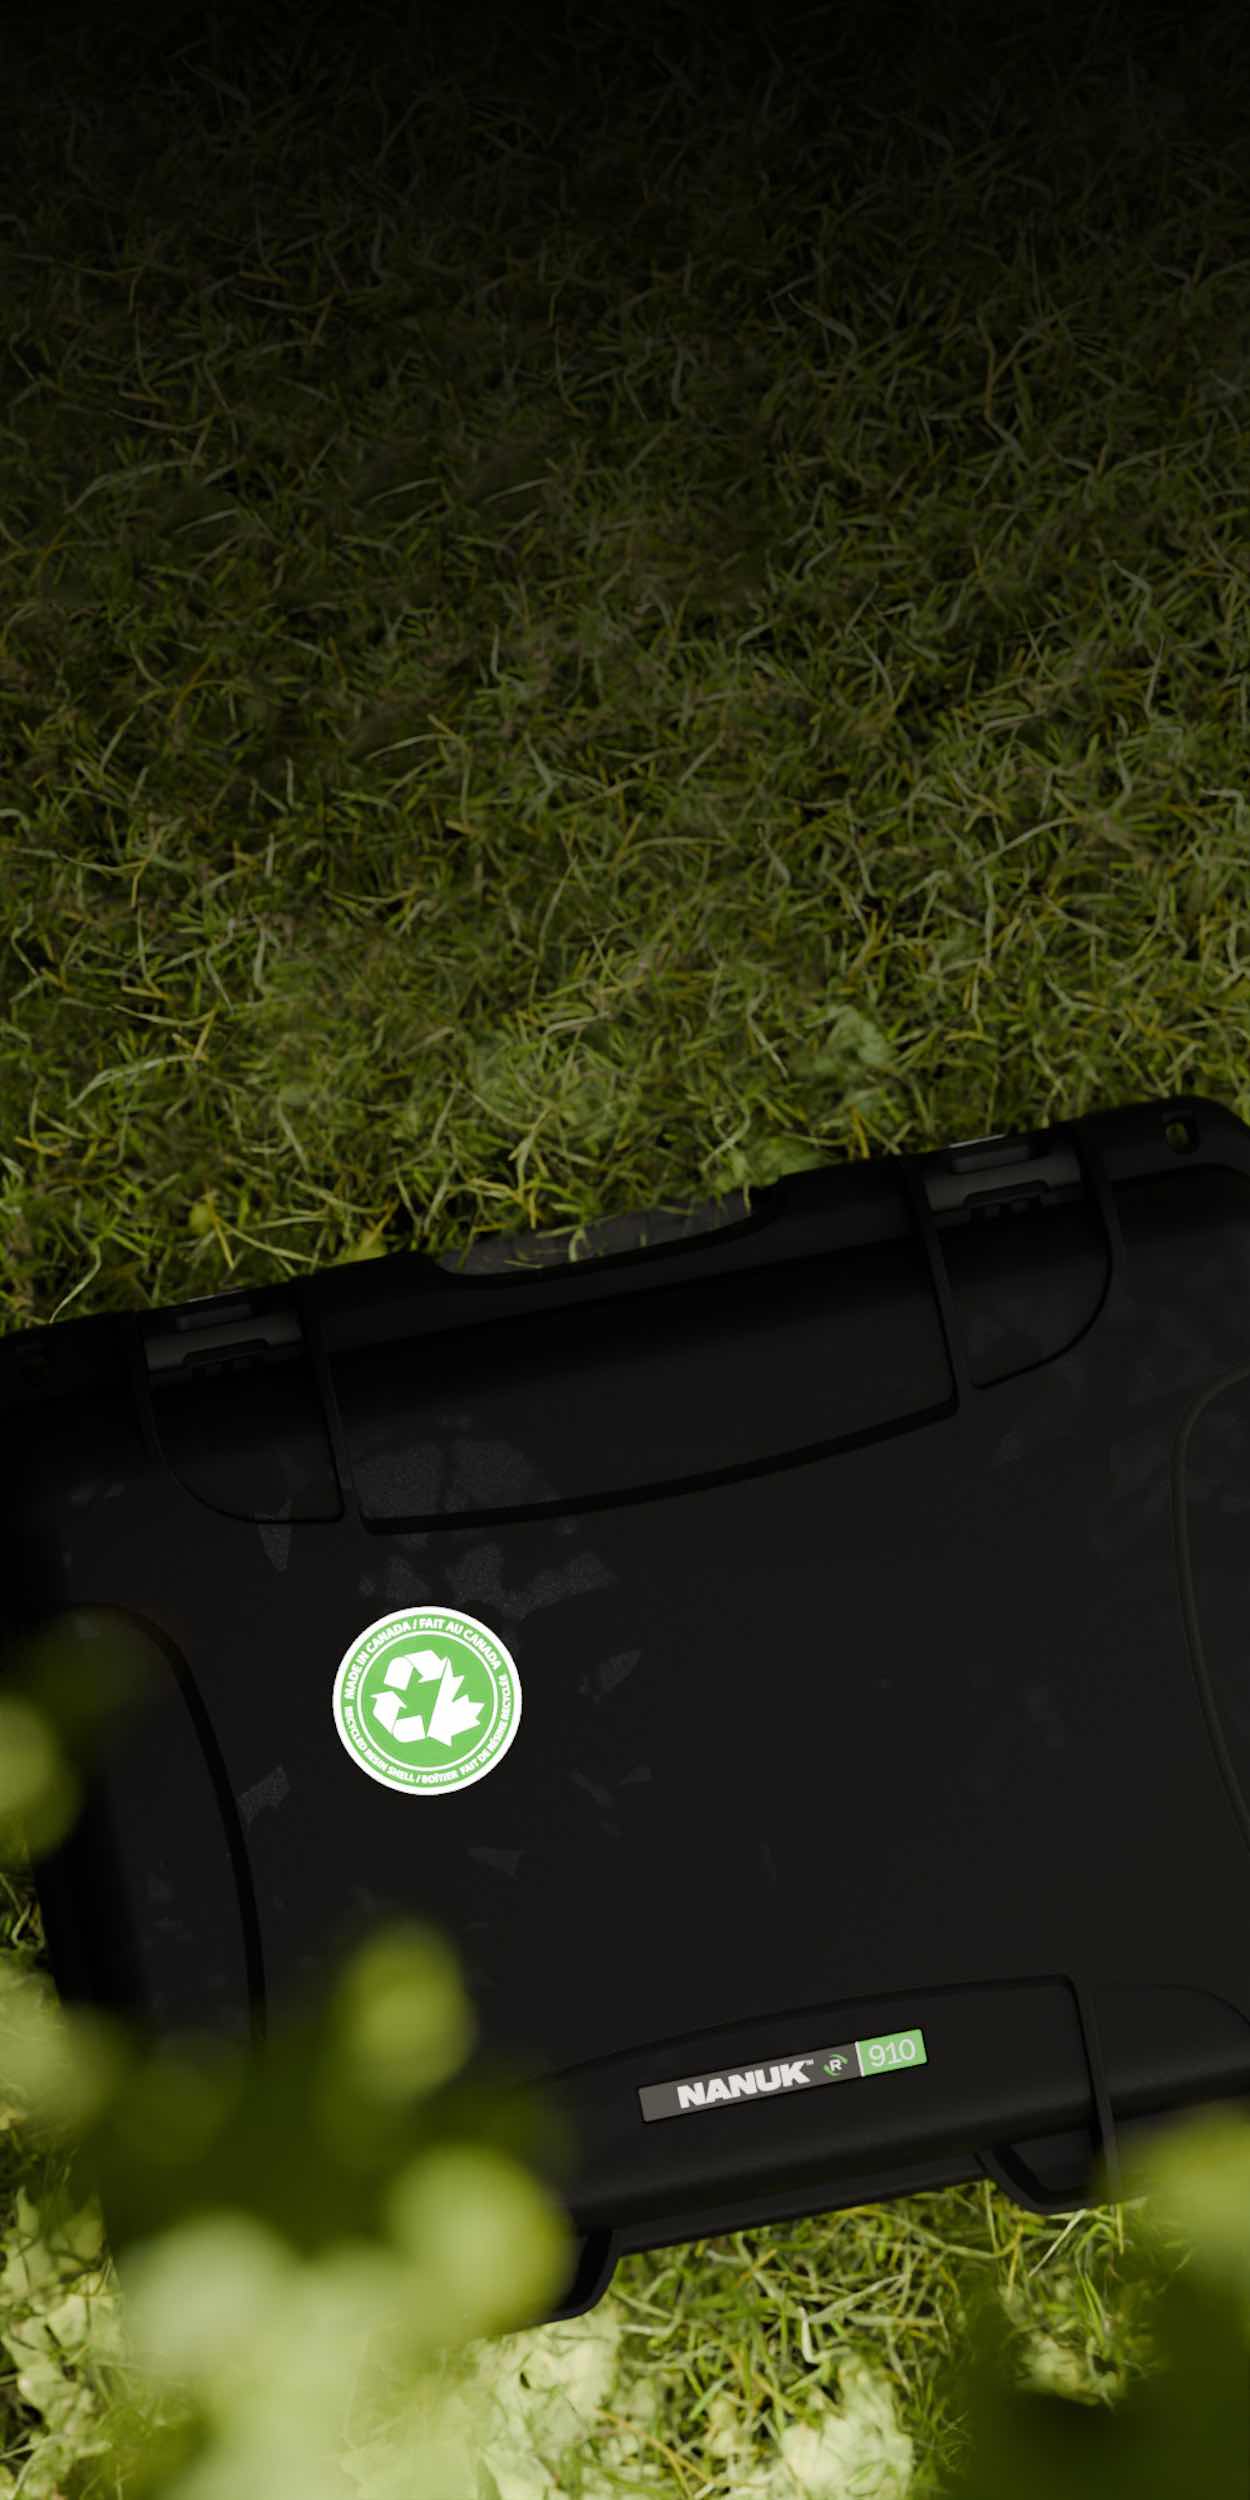 NANUK hard cases on grass highlighting gear protection and eco-friendly packaging for resellers